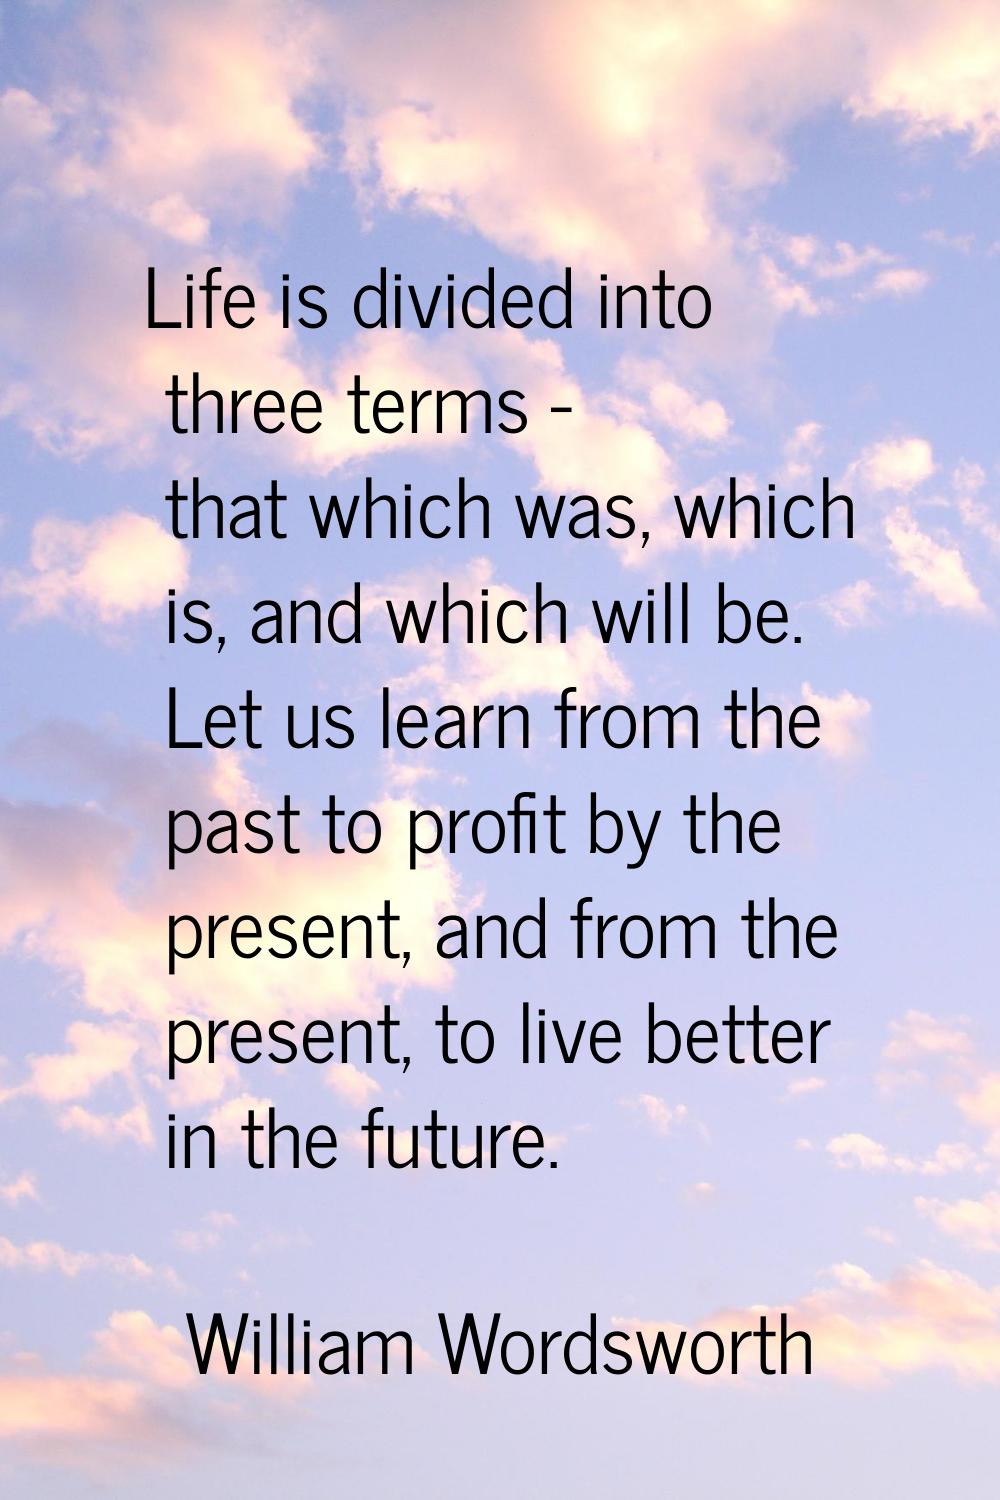 Life is divided into three terms - that which was, which is, and which will be. Let us learn from t